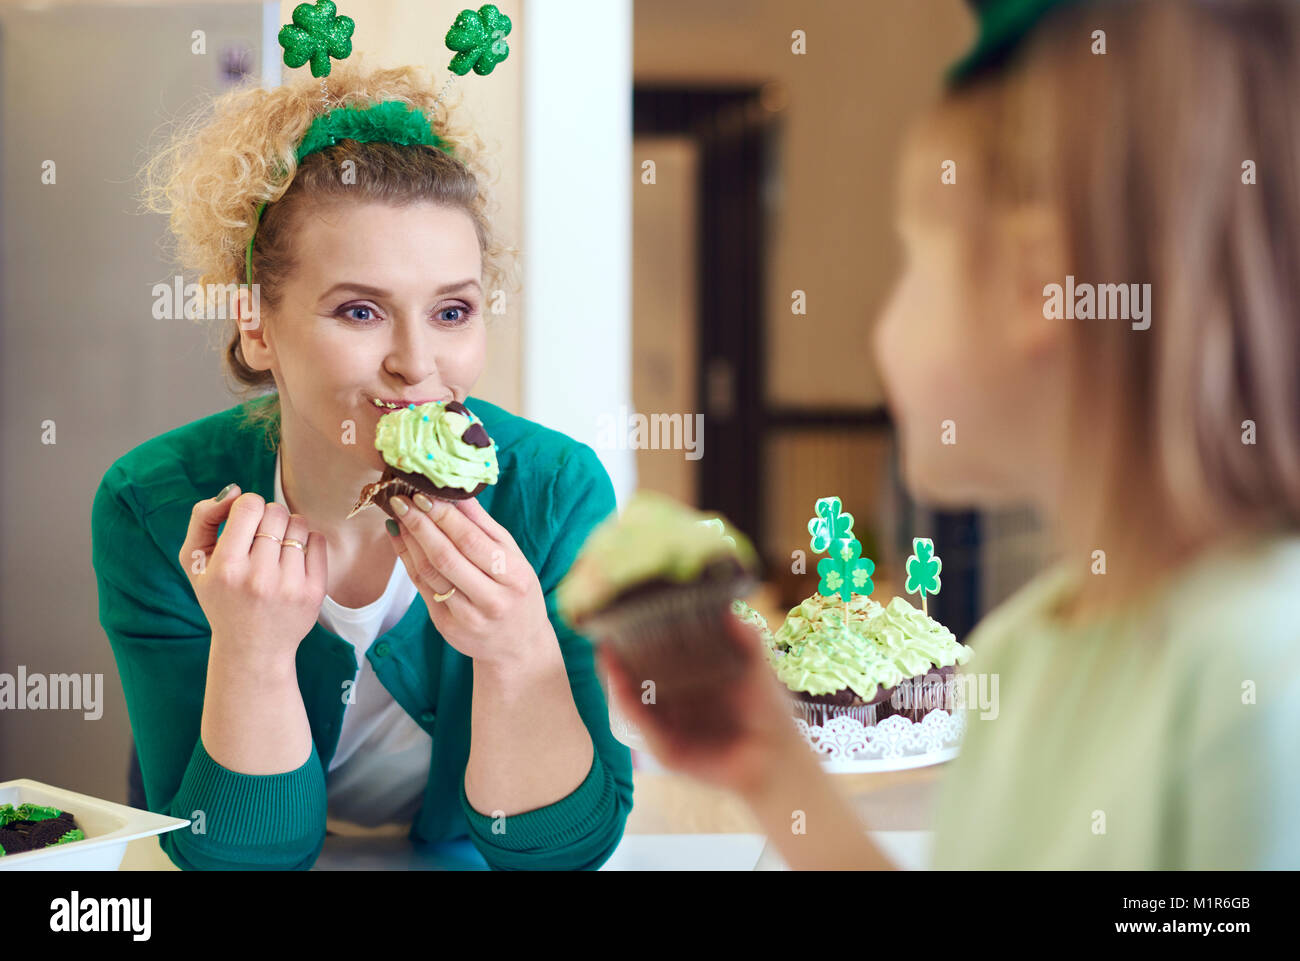 Woman eating tasty a cupcake Stock Photo